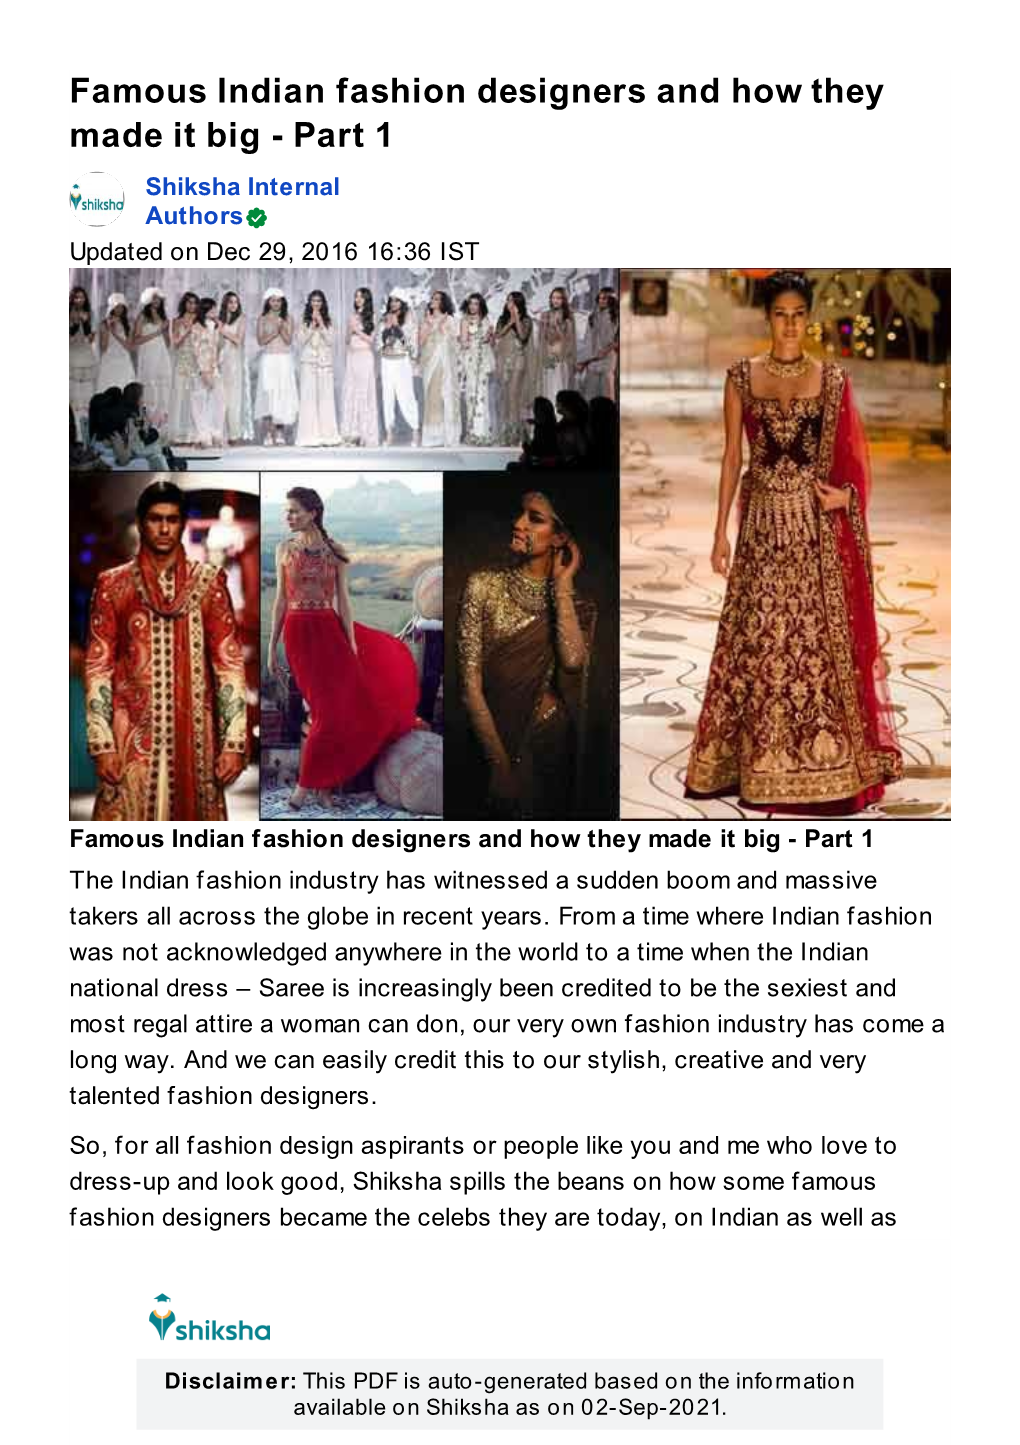 Famous Indian Fashion Designers and How They Made It Big- Part 1 | Shiksha